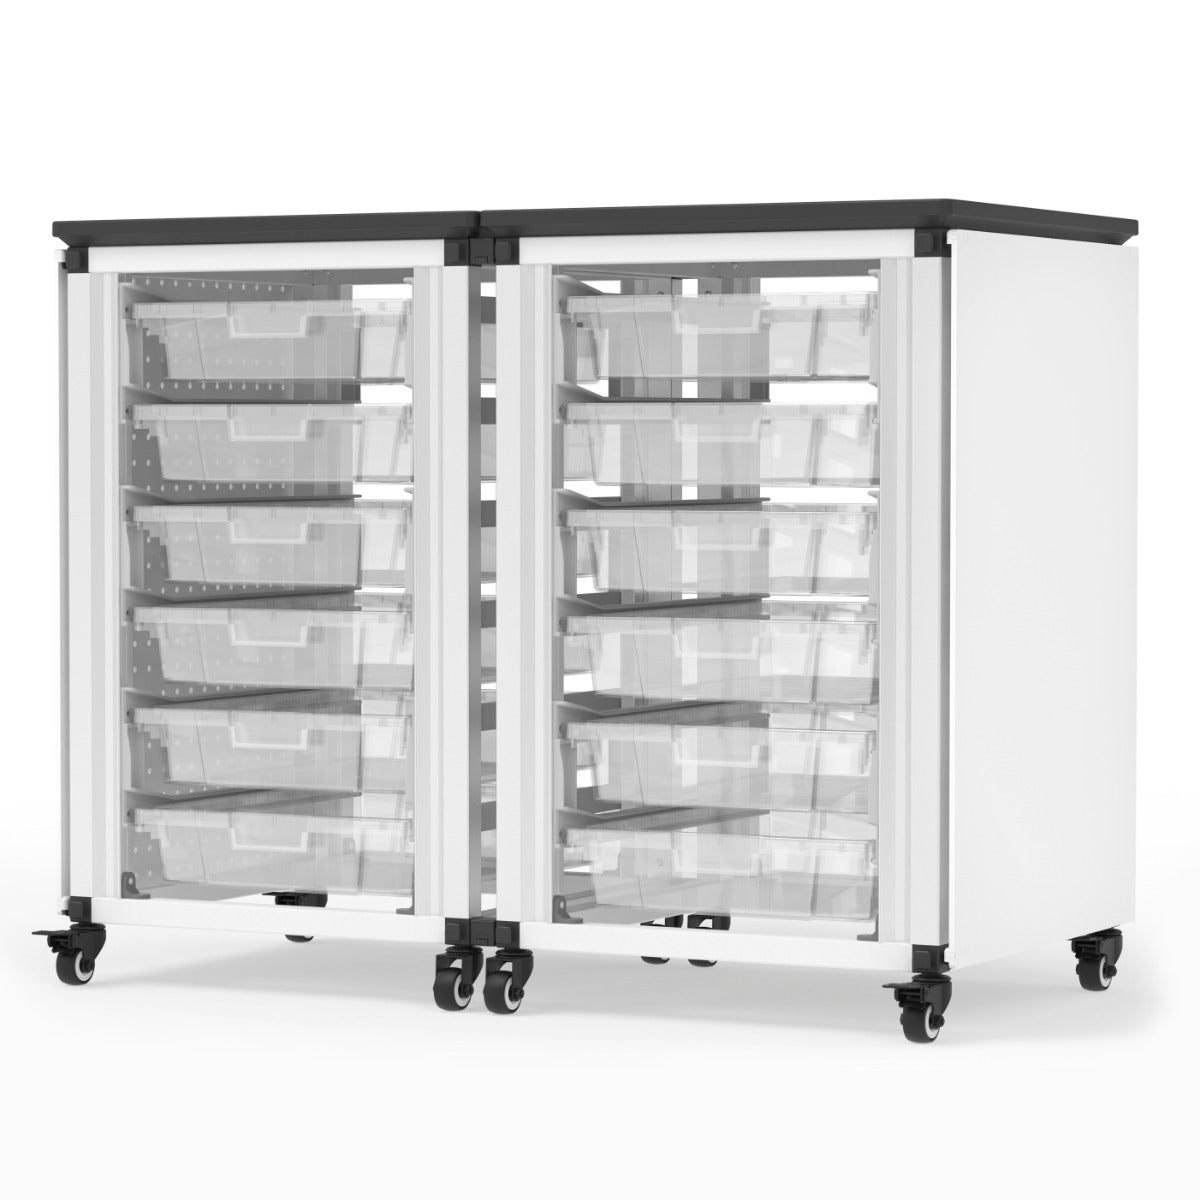 Luxor Modular Classroom Storage Cabinet - 2 side-by-side modules with 12 small bins (LUX-MBS-STR-21-12S) - SchoolOutlet